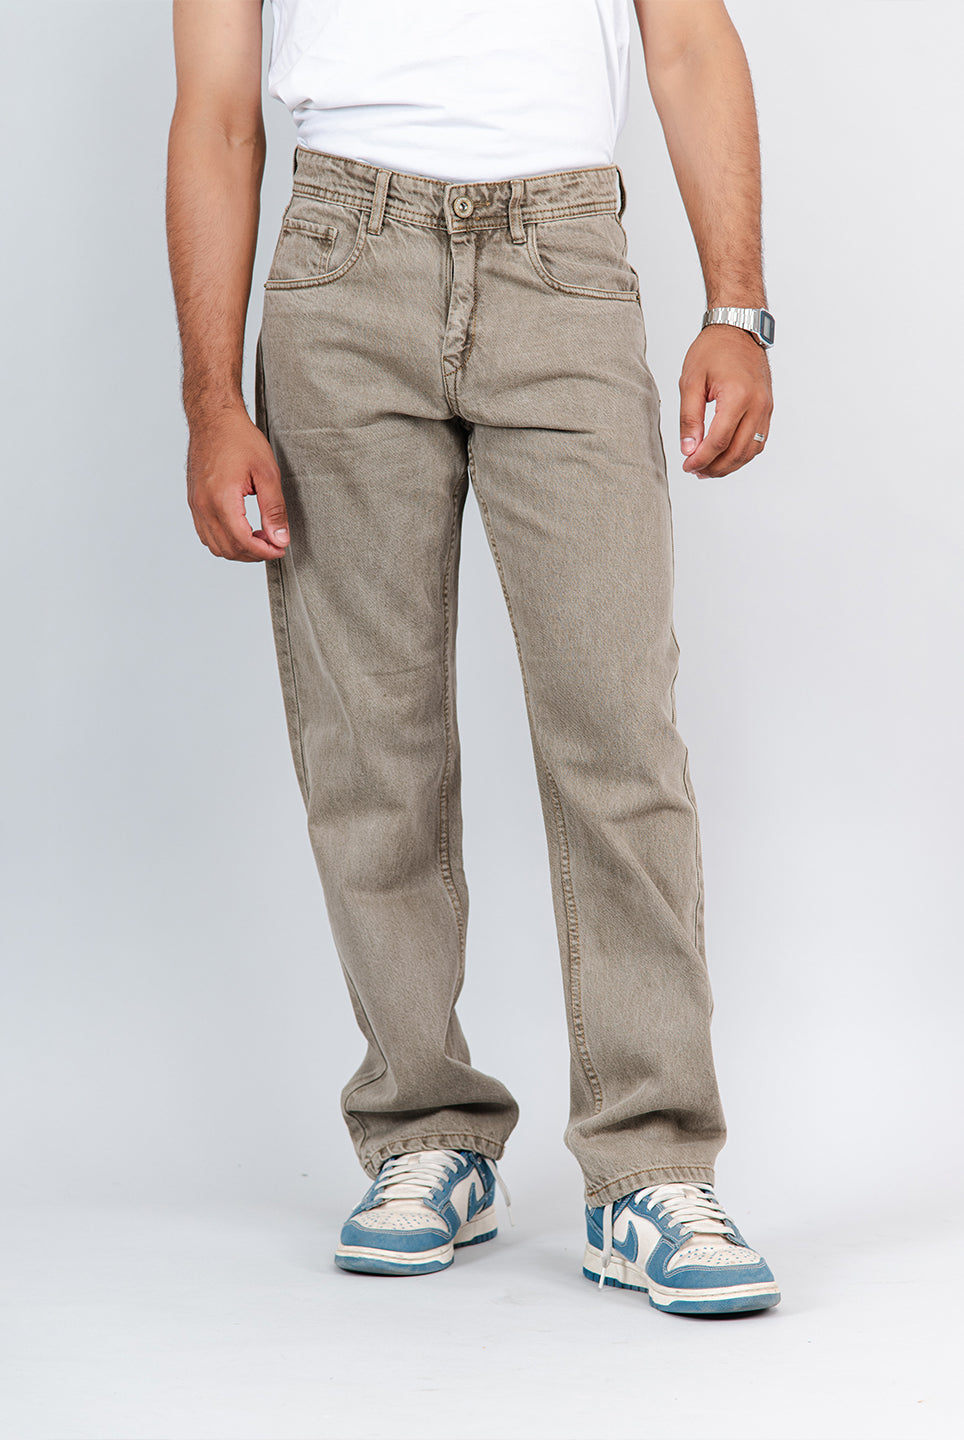 camel brown straight fit mens jeans